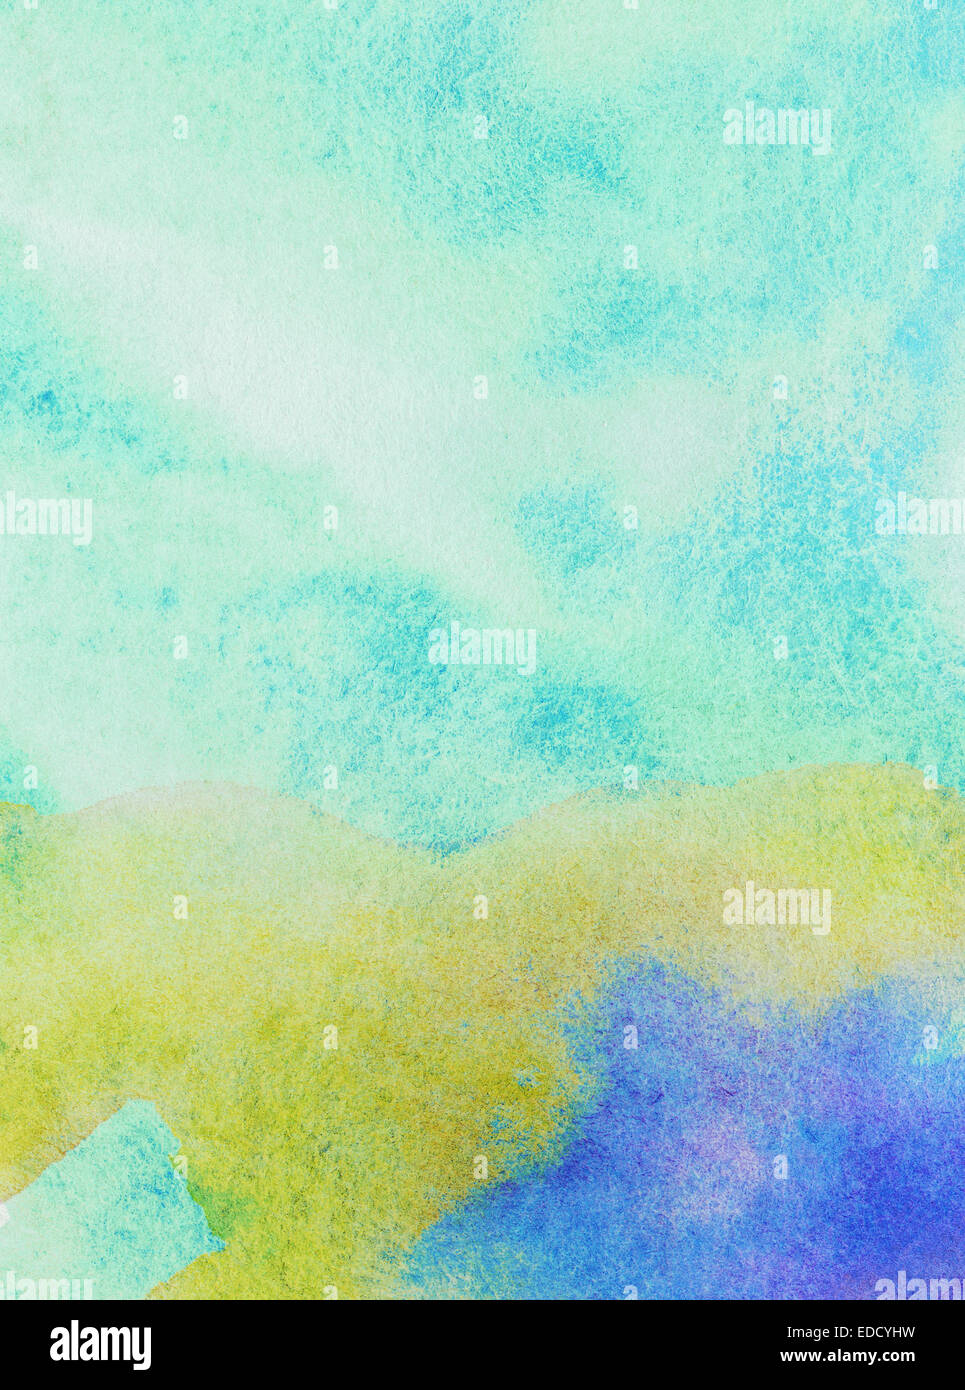 Light colorful watercolor stains. Stock Photo